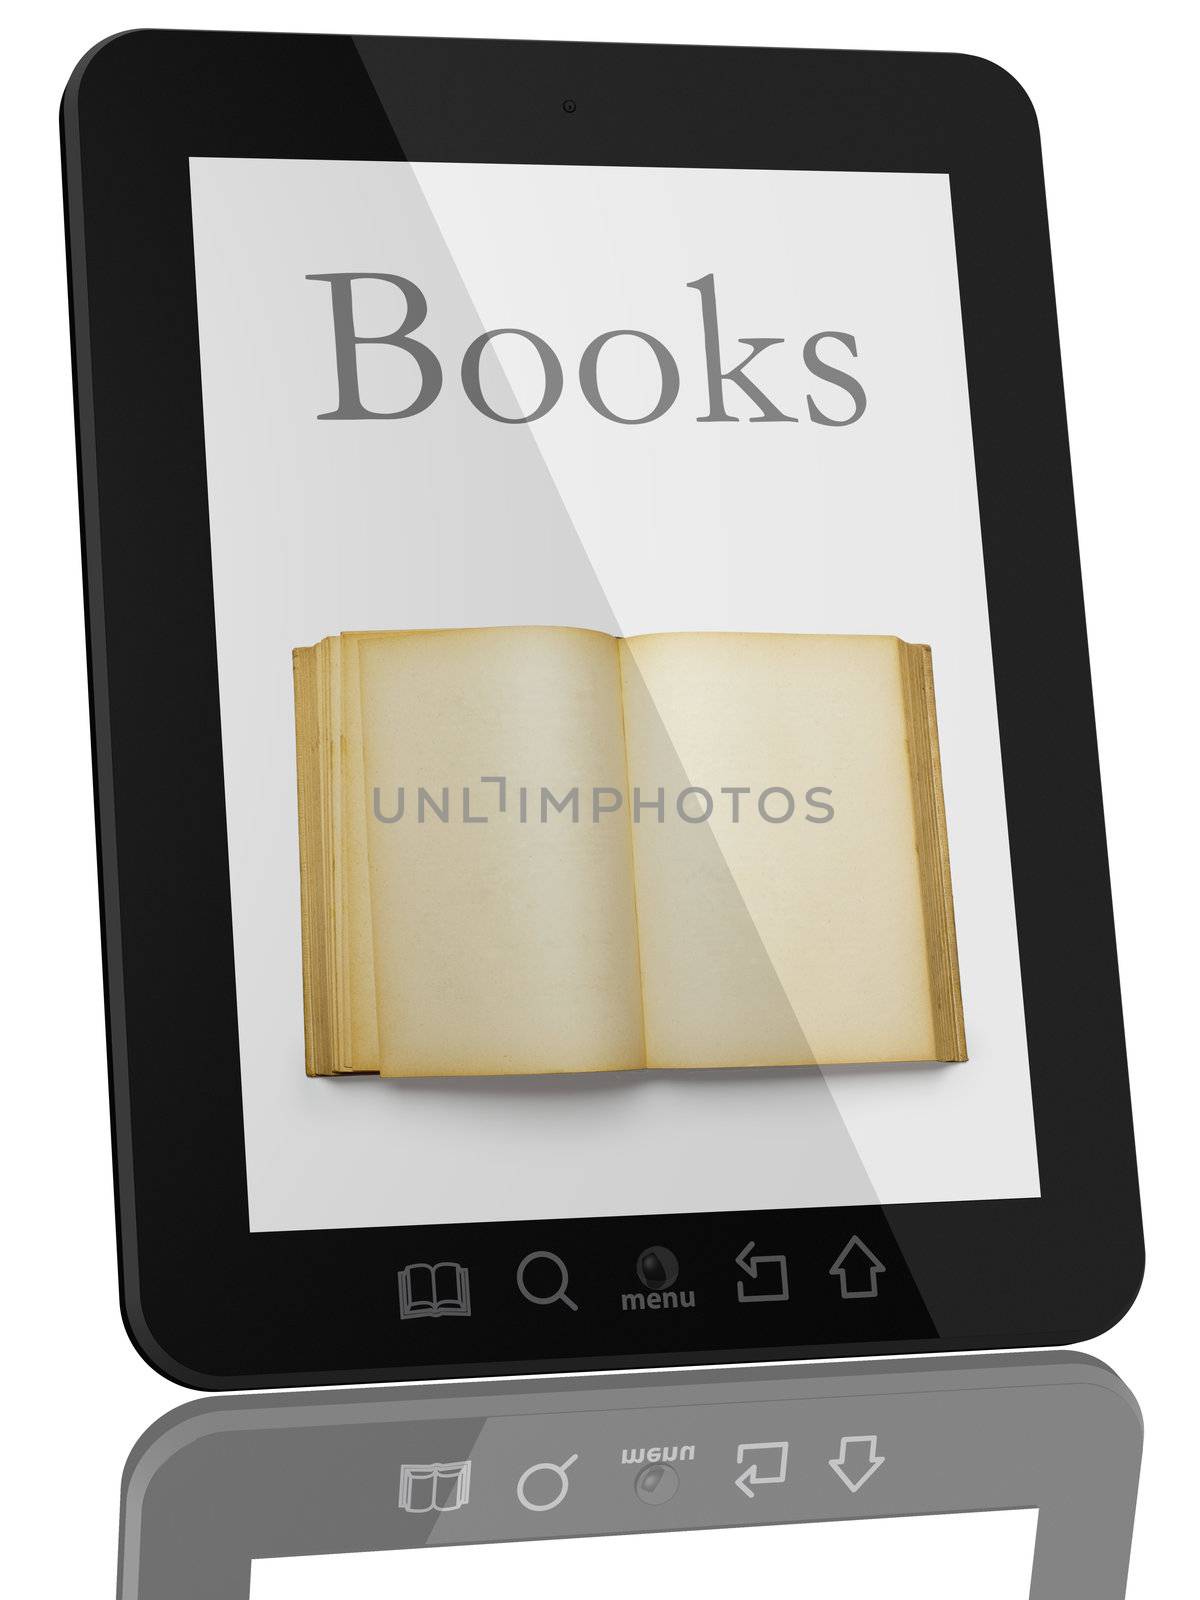 Open Book on screen on Generic Tablet Computer - Digital Library by adamr